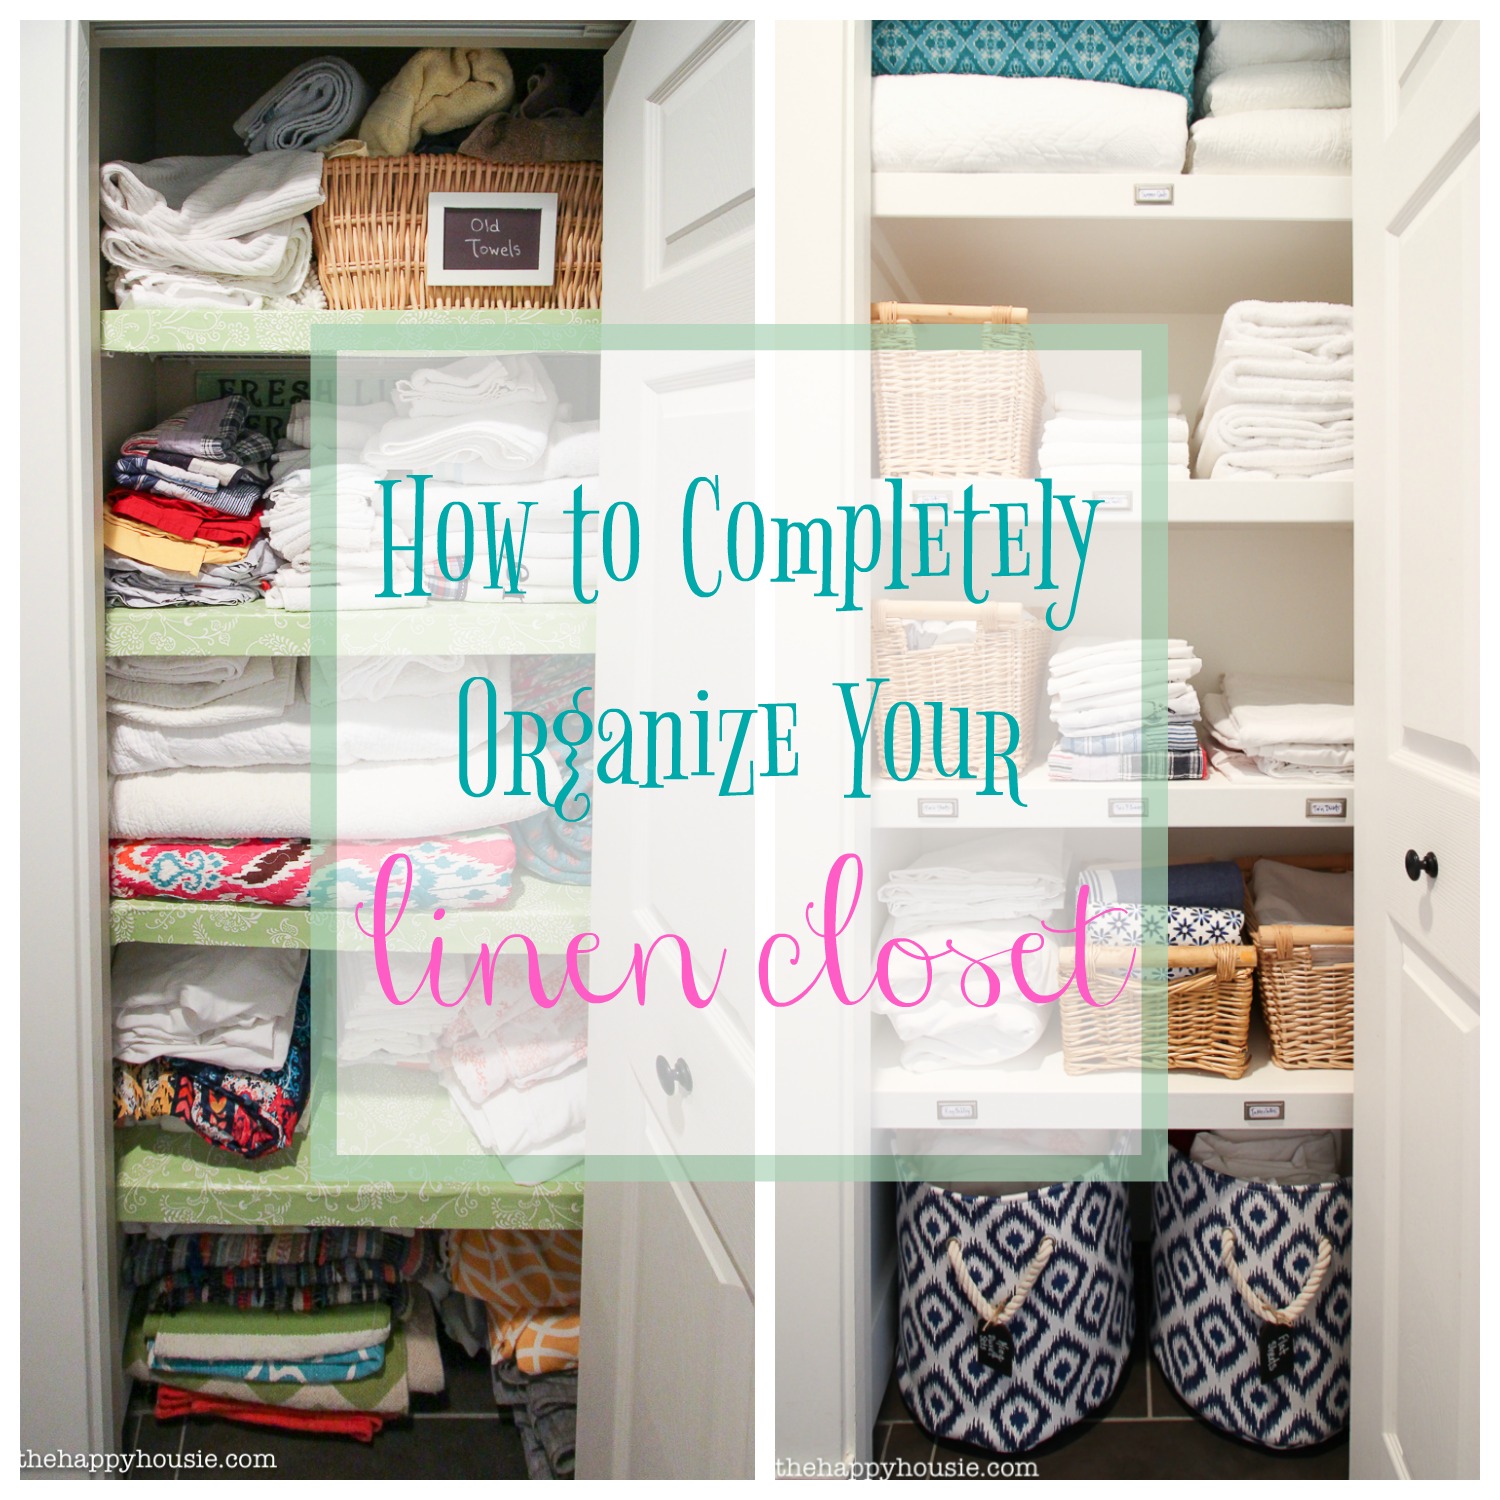 How To Completely Organize Your Linen Closet graphic.